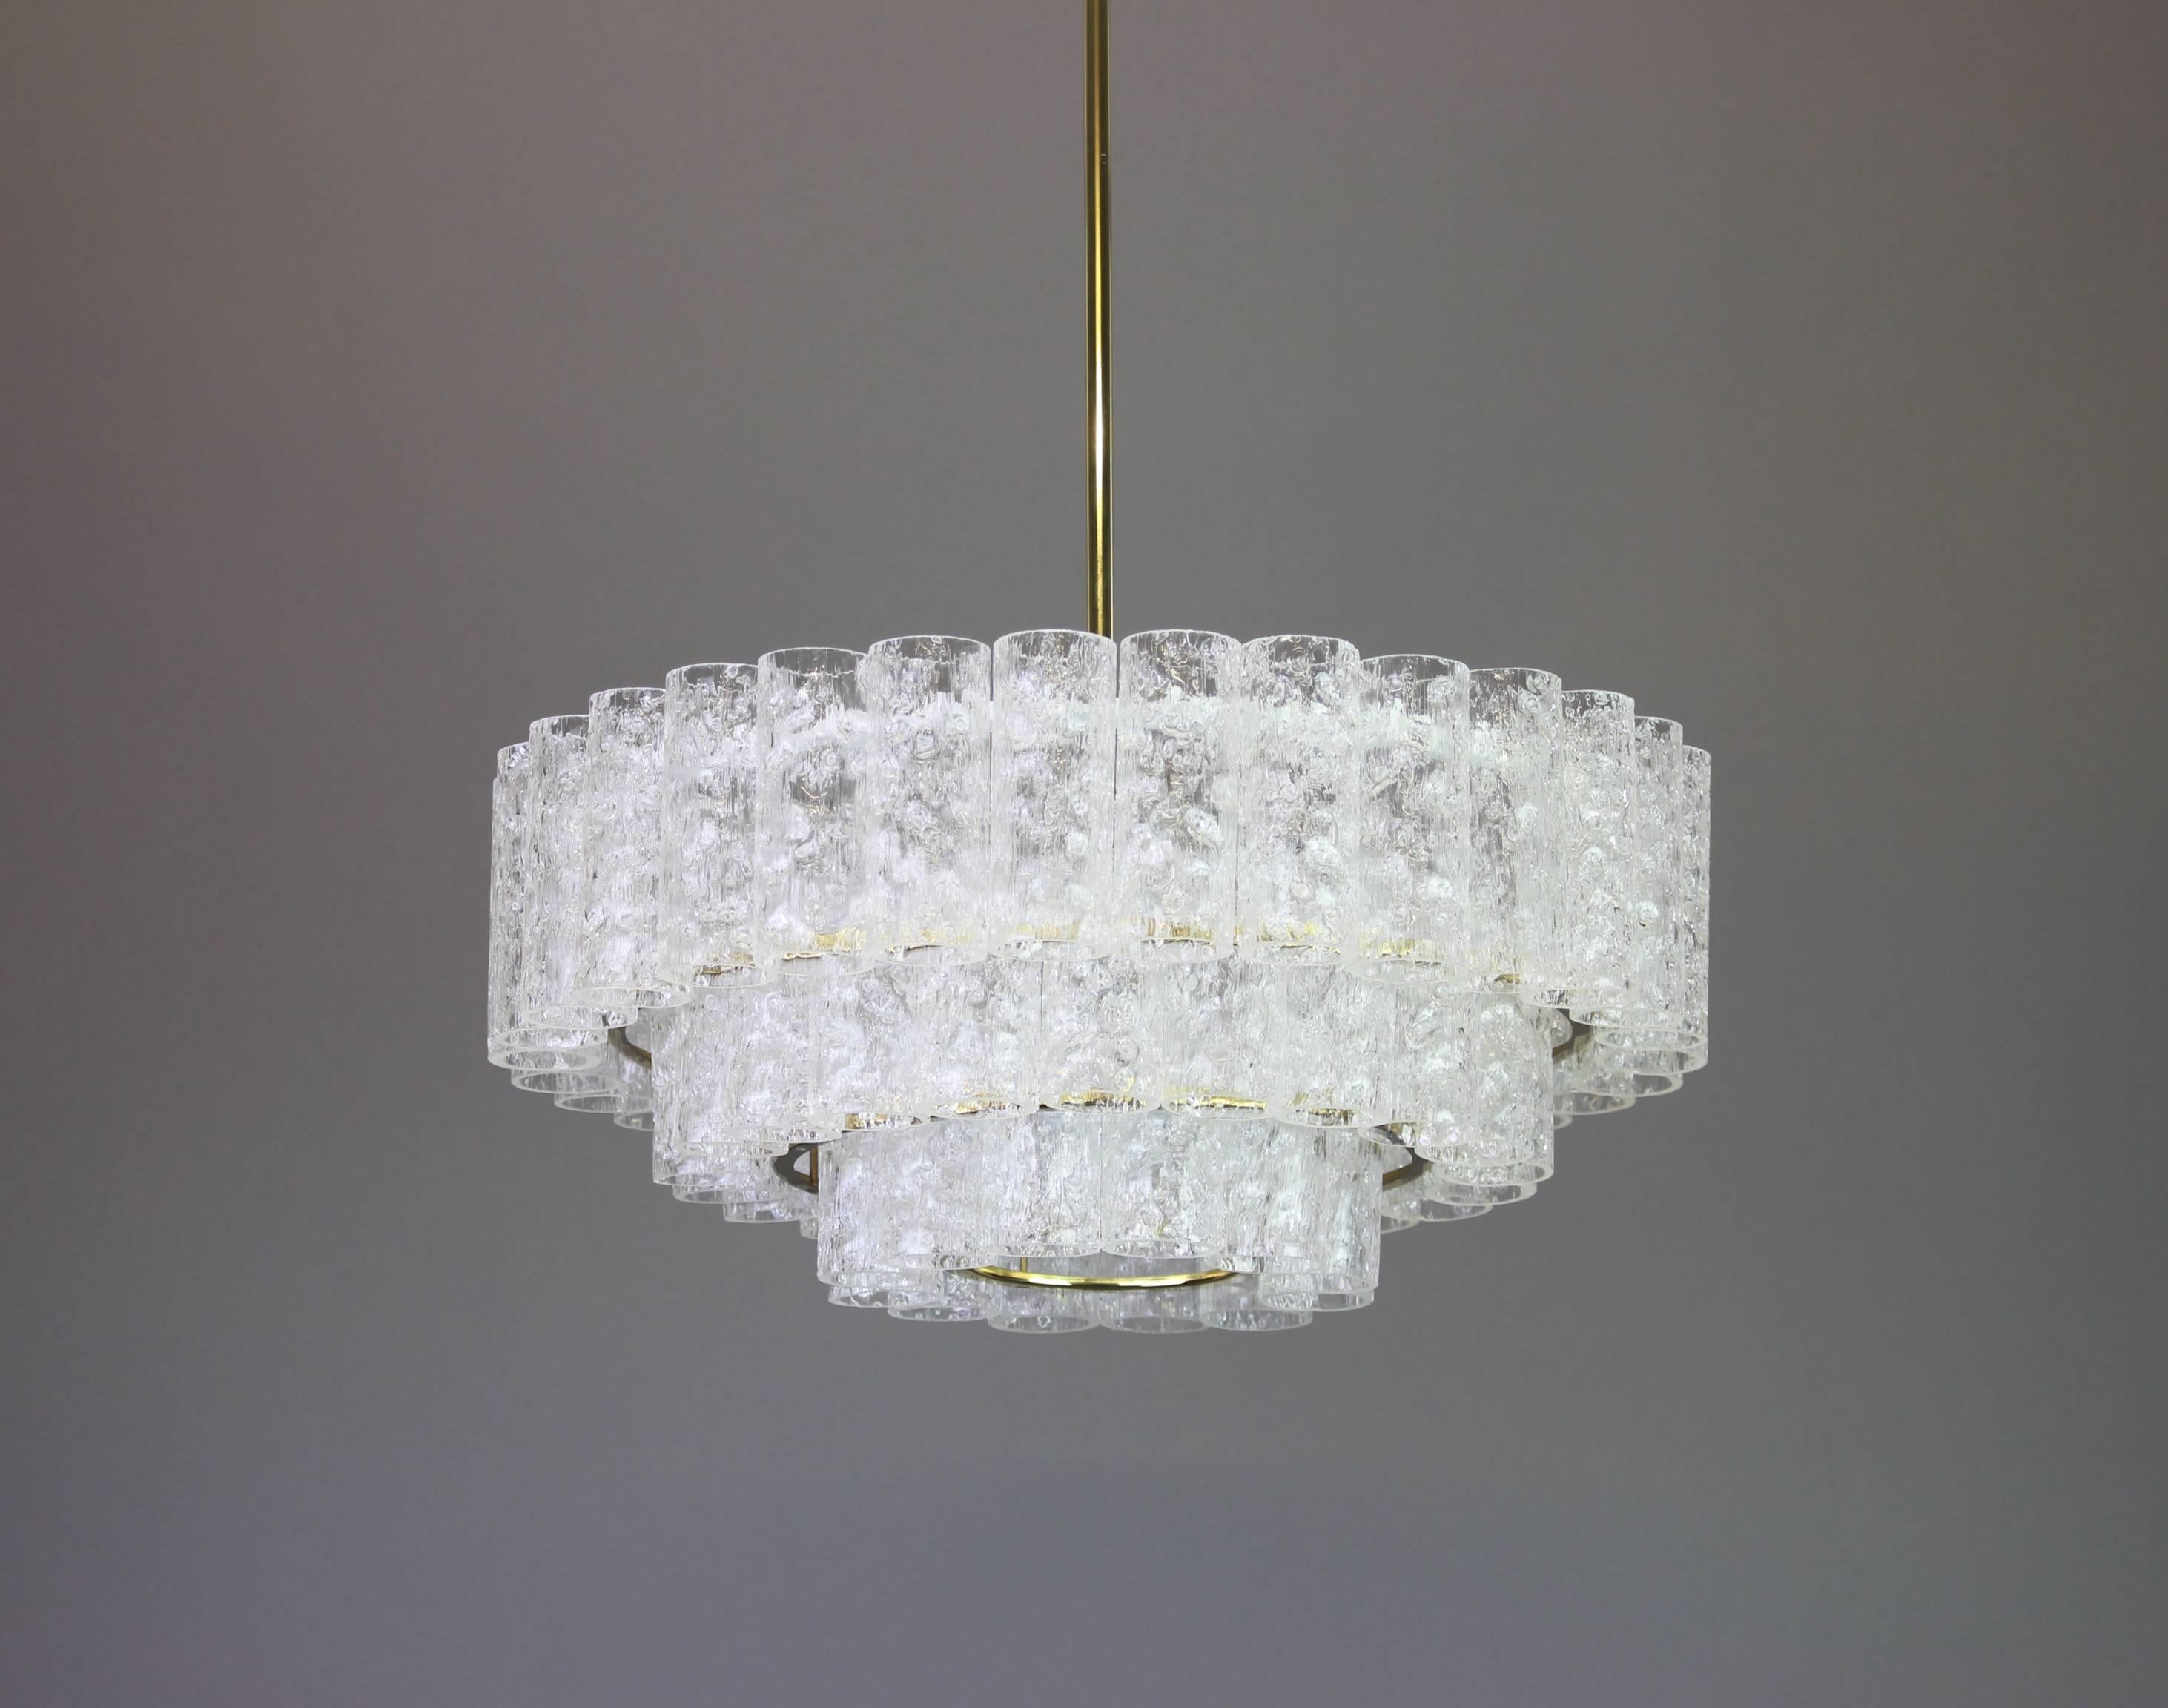 1 of 2 Stunning Murano Ice Glass Tubes Chandelier by Doria, Germany, 1960s For Sale 1